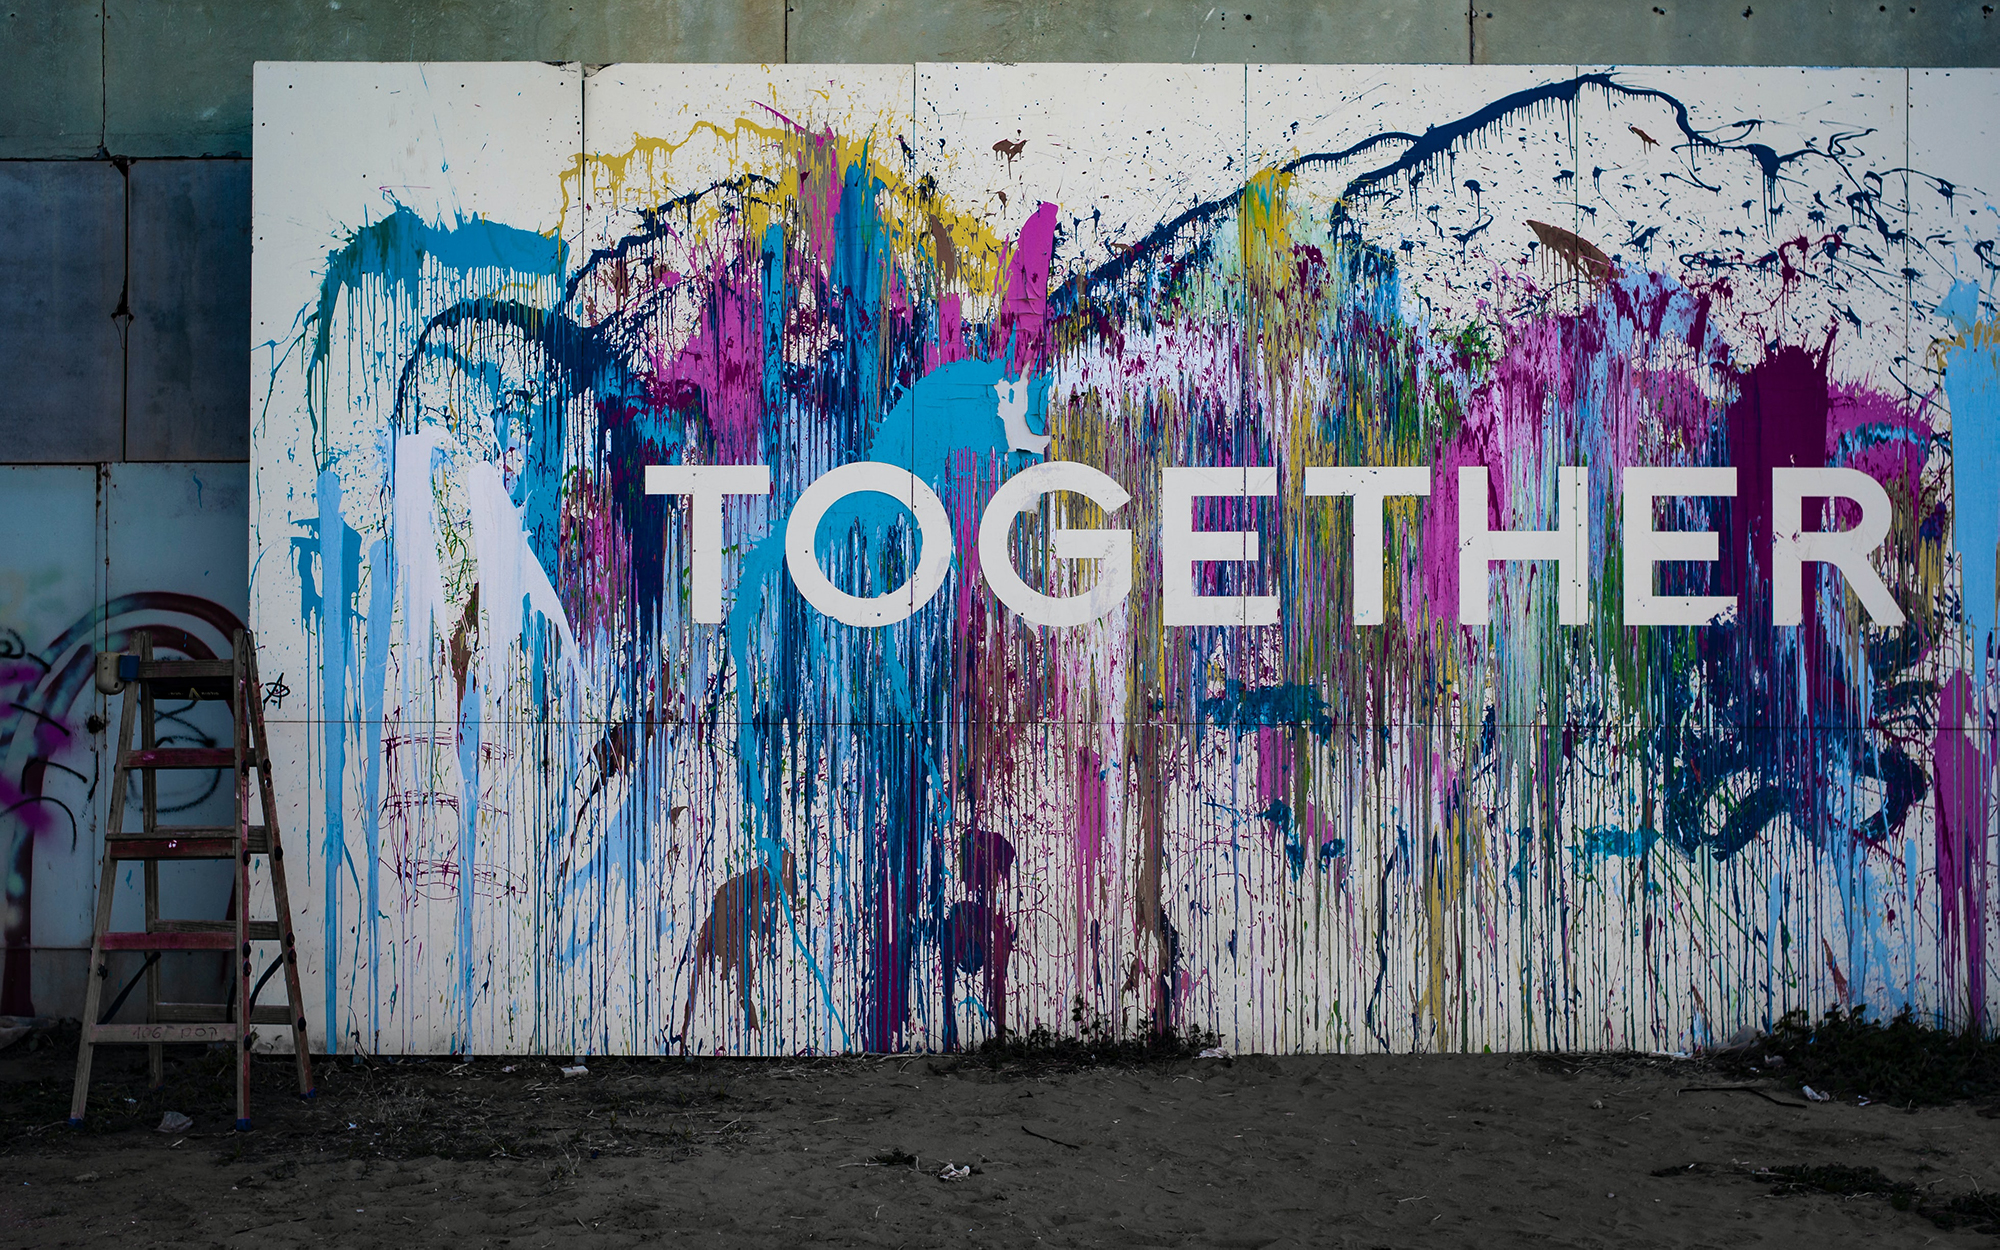 Together, written on a mural.